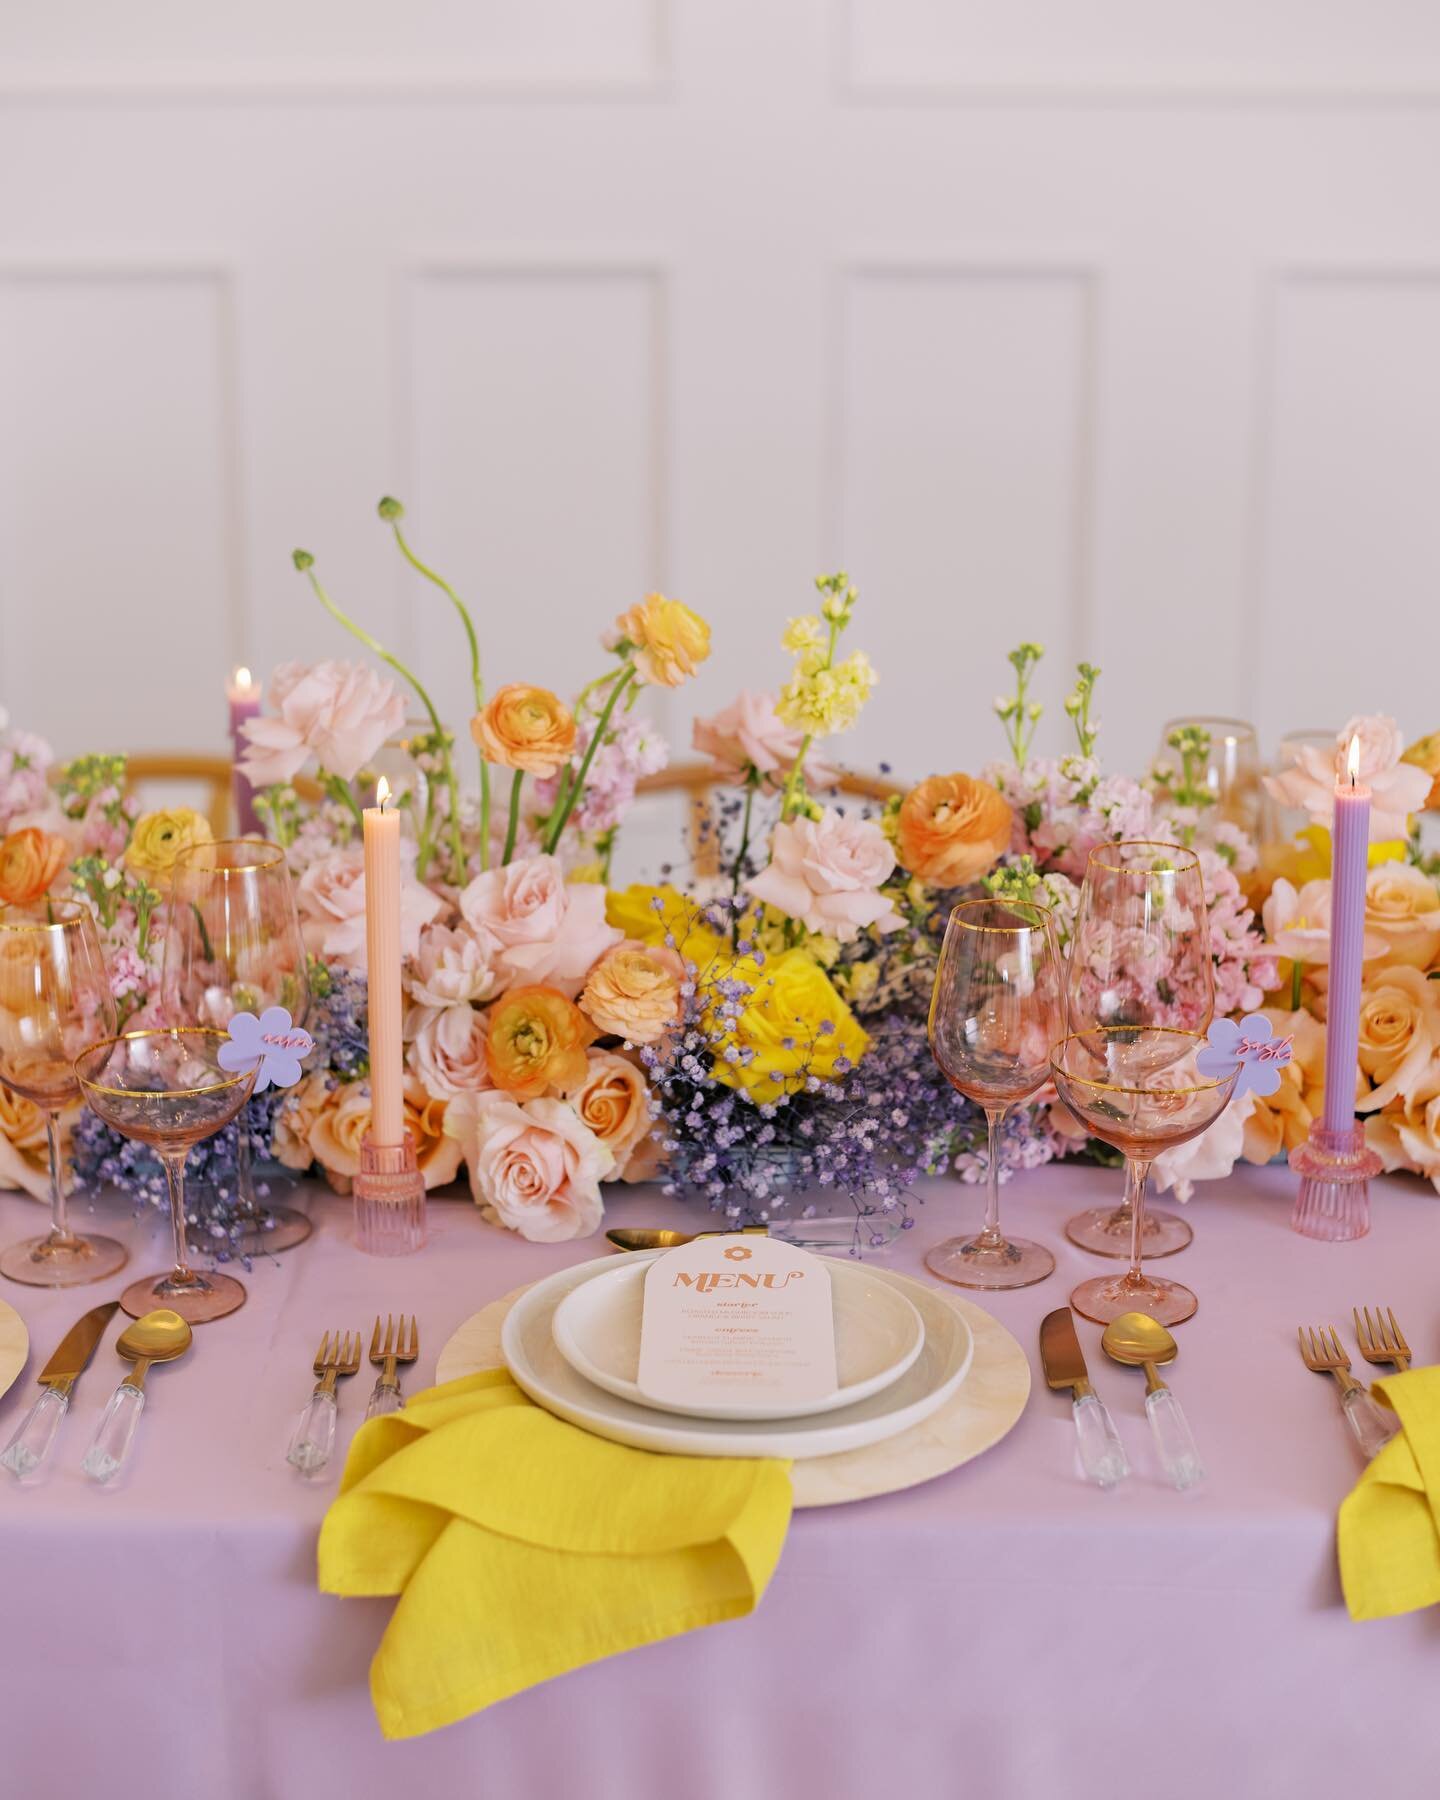 It&rsquo;s giving pastels. It&rsquo;s giving disco. It&rsquo;s giving 70s. It&rsquo;s giving spring. It&rsquo;s giving everythingggg.

2023 is going to be full of colour and I&rsquo;m so here for it!

Design &amp; Styling: @oliveandcoweddings
Photogr